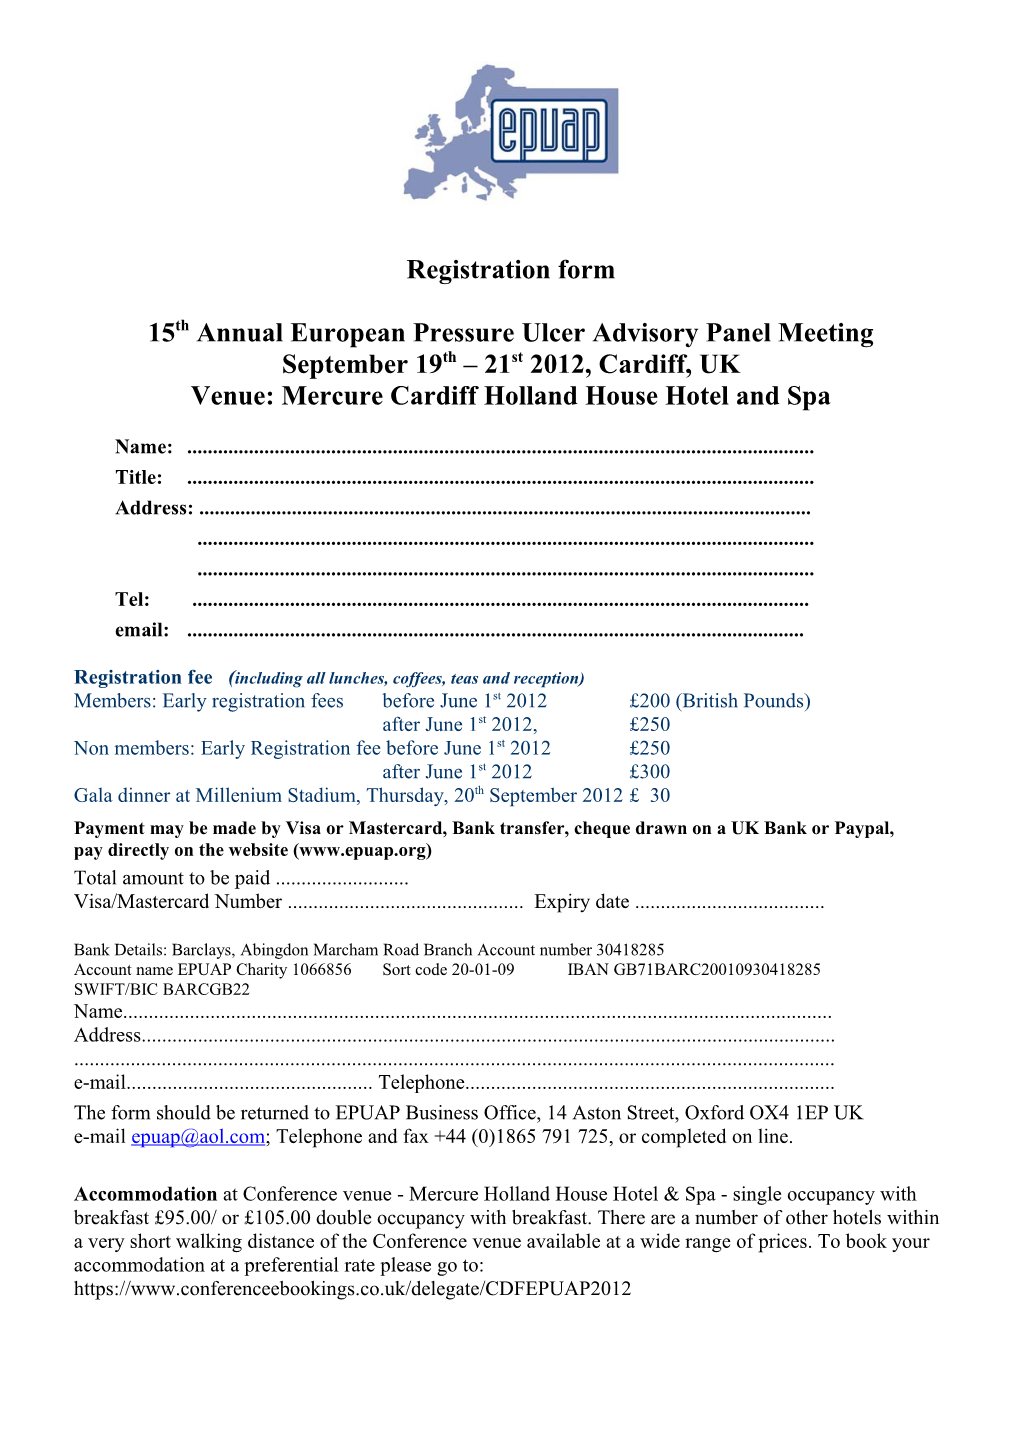 Registration Form for 14Th Annual Pressure Ulcer Advisory Panel Meeting